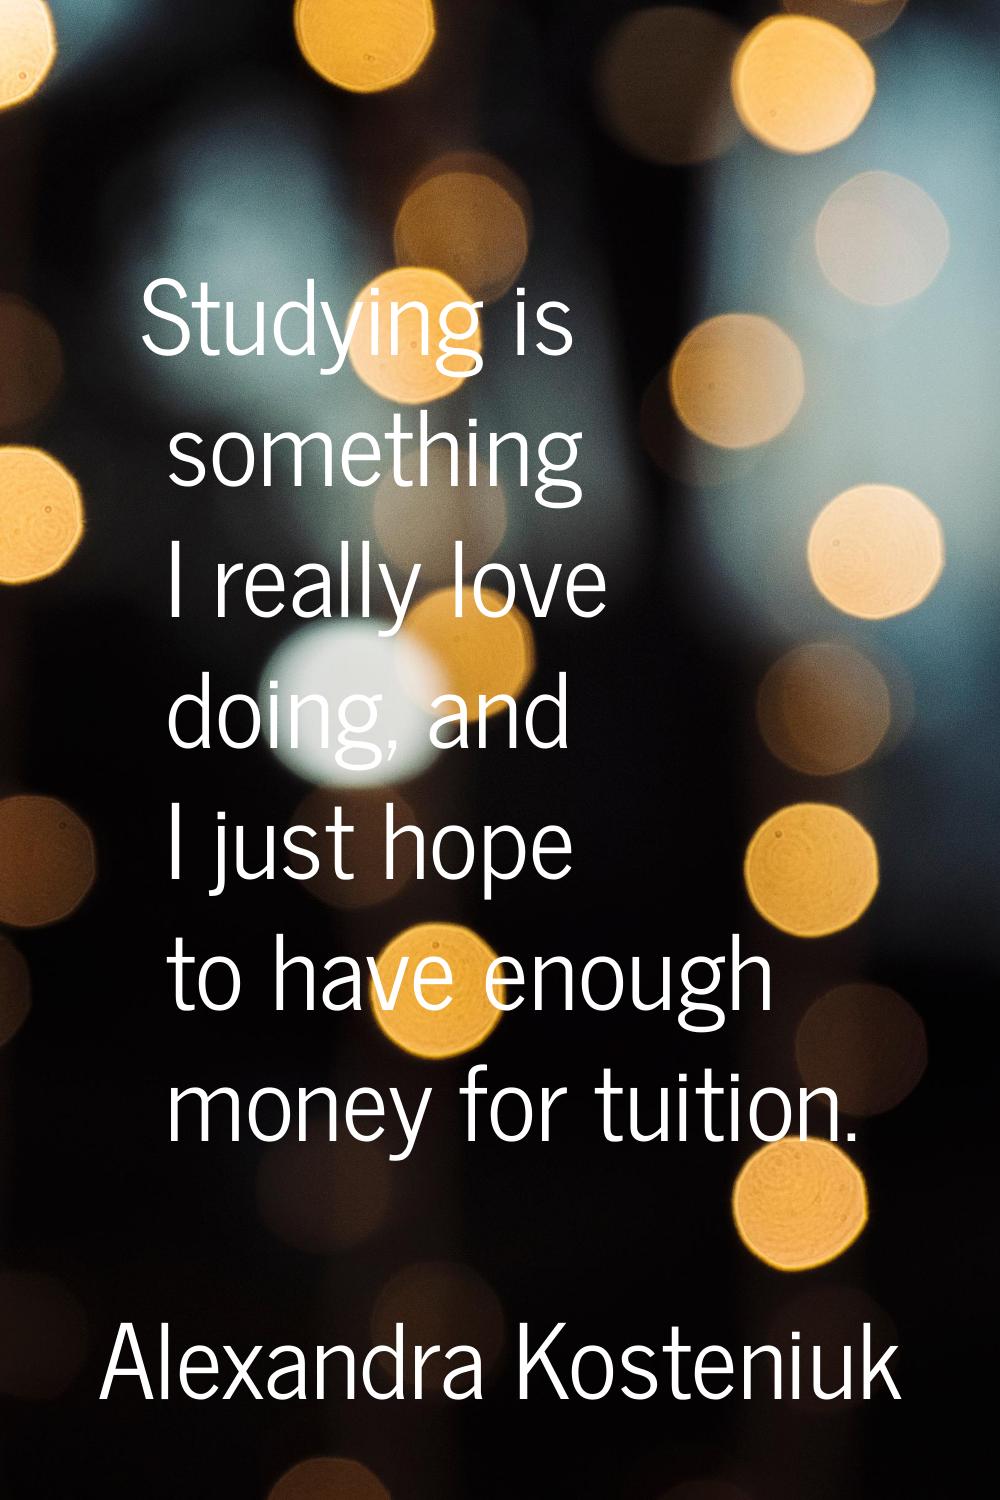 Studying is something I really love doing, and I just hope to have enough money for tuition.